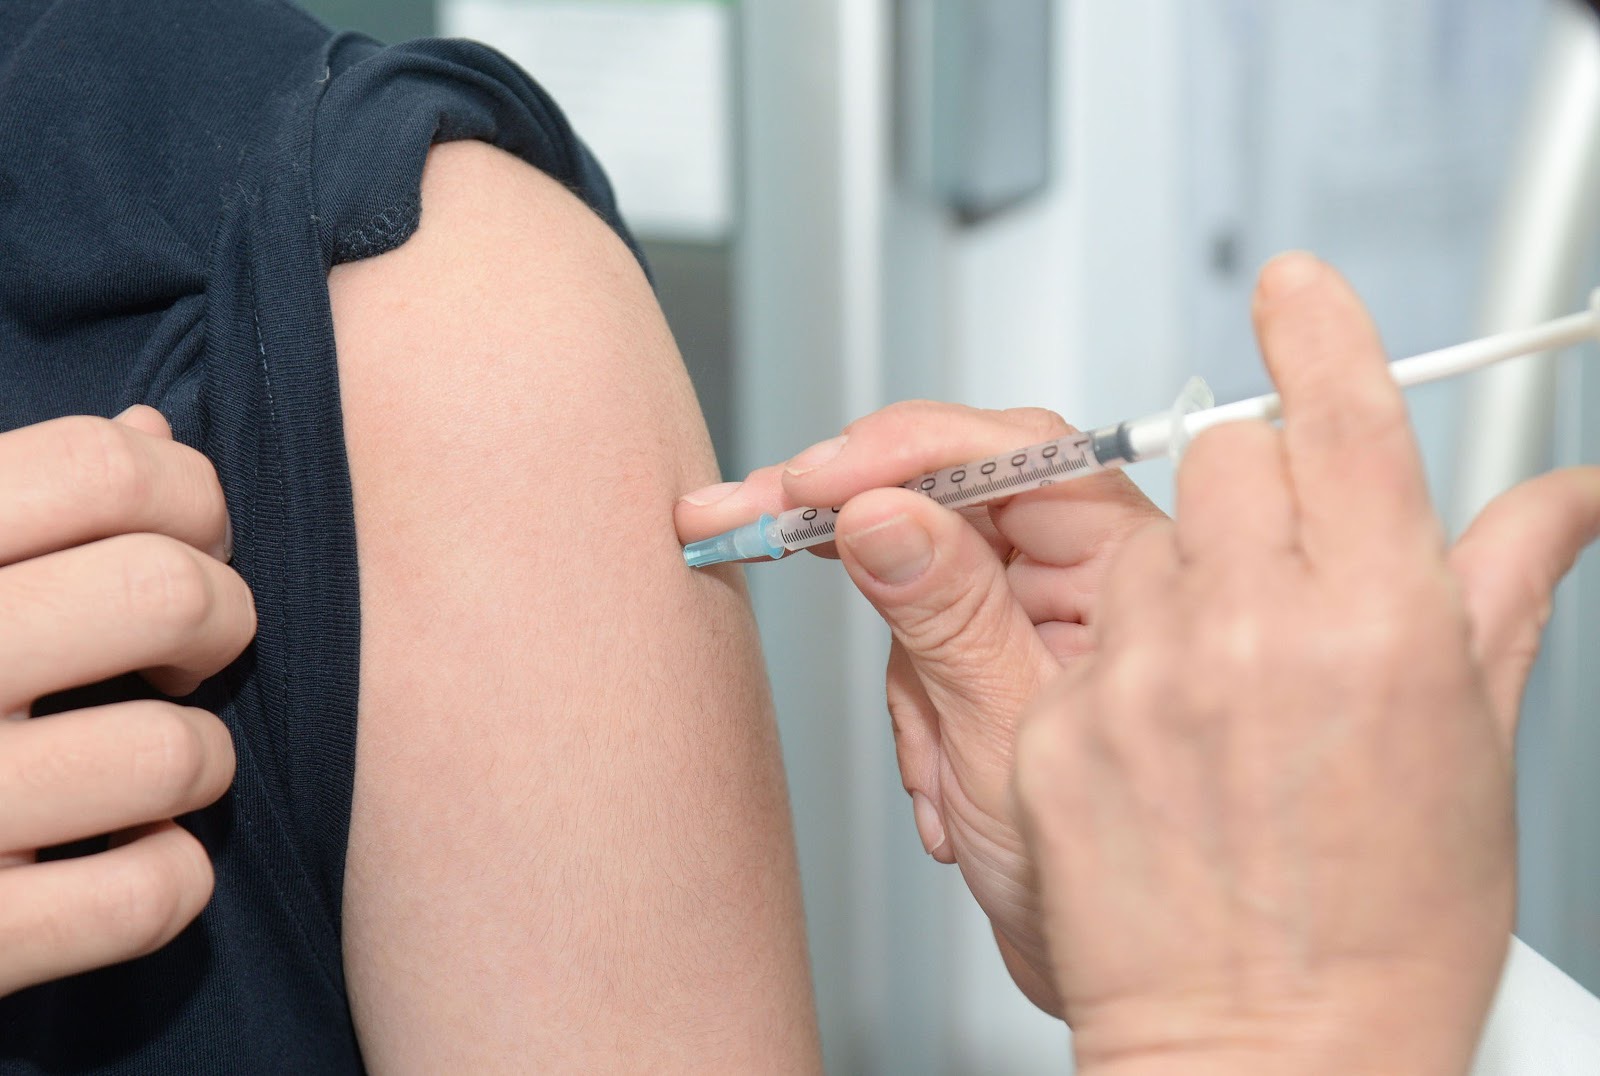 Free Flu Shots offered on Campus